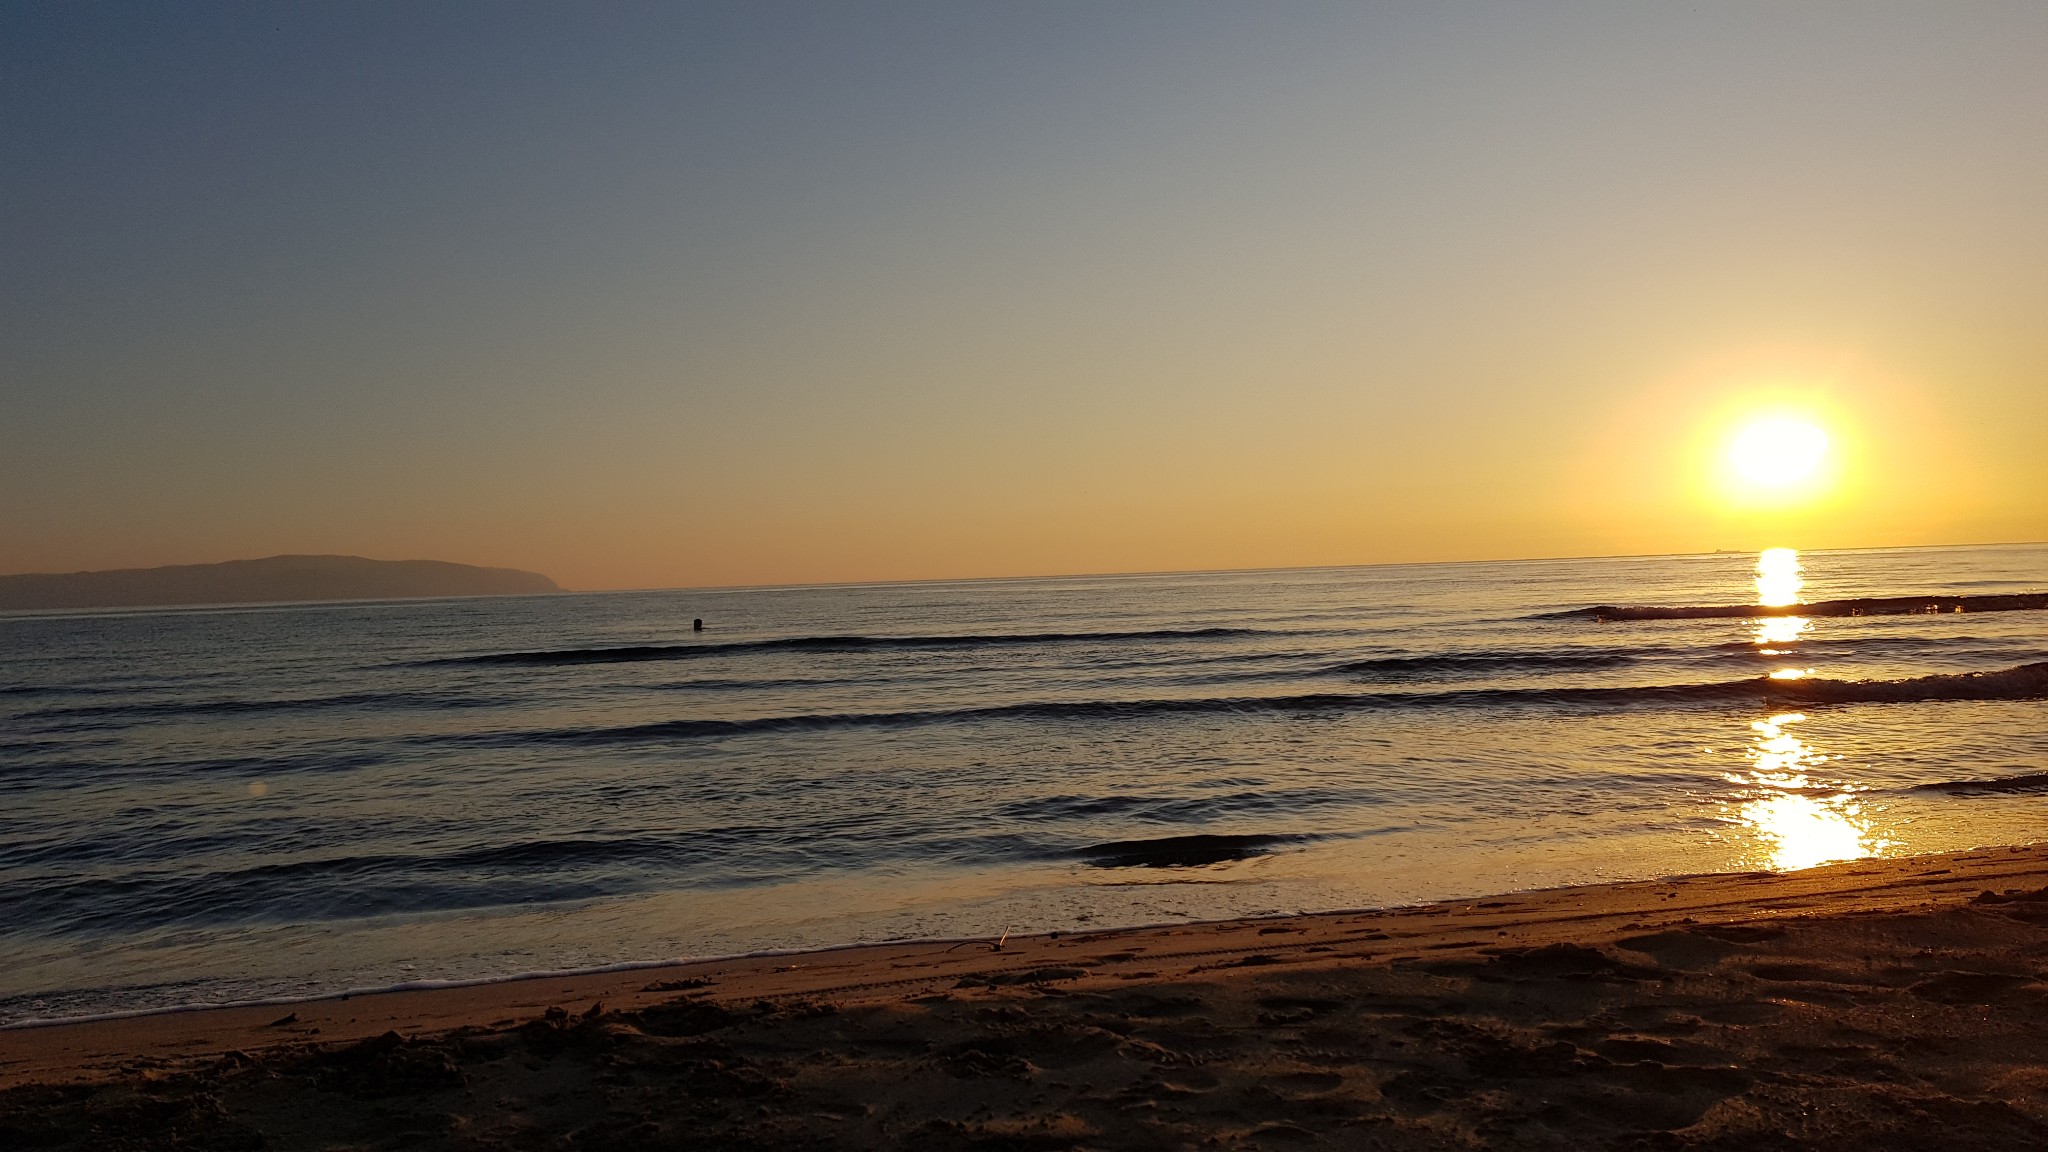 Mounda Beach at sunset - just a few minutes drive from Villa Aglaia